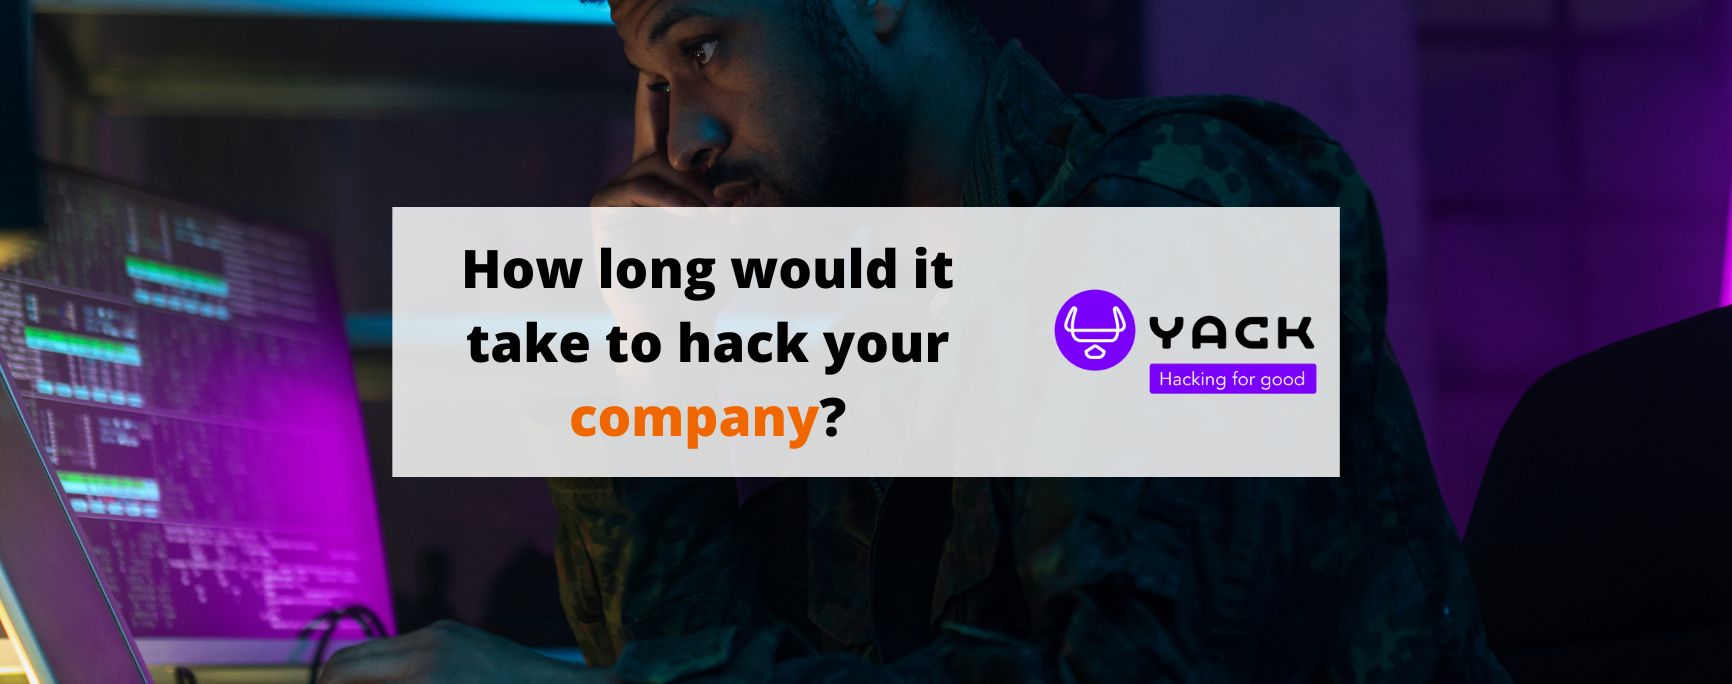 How long would it take to hack your company?